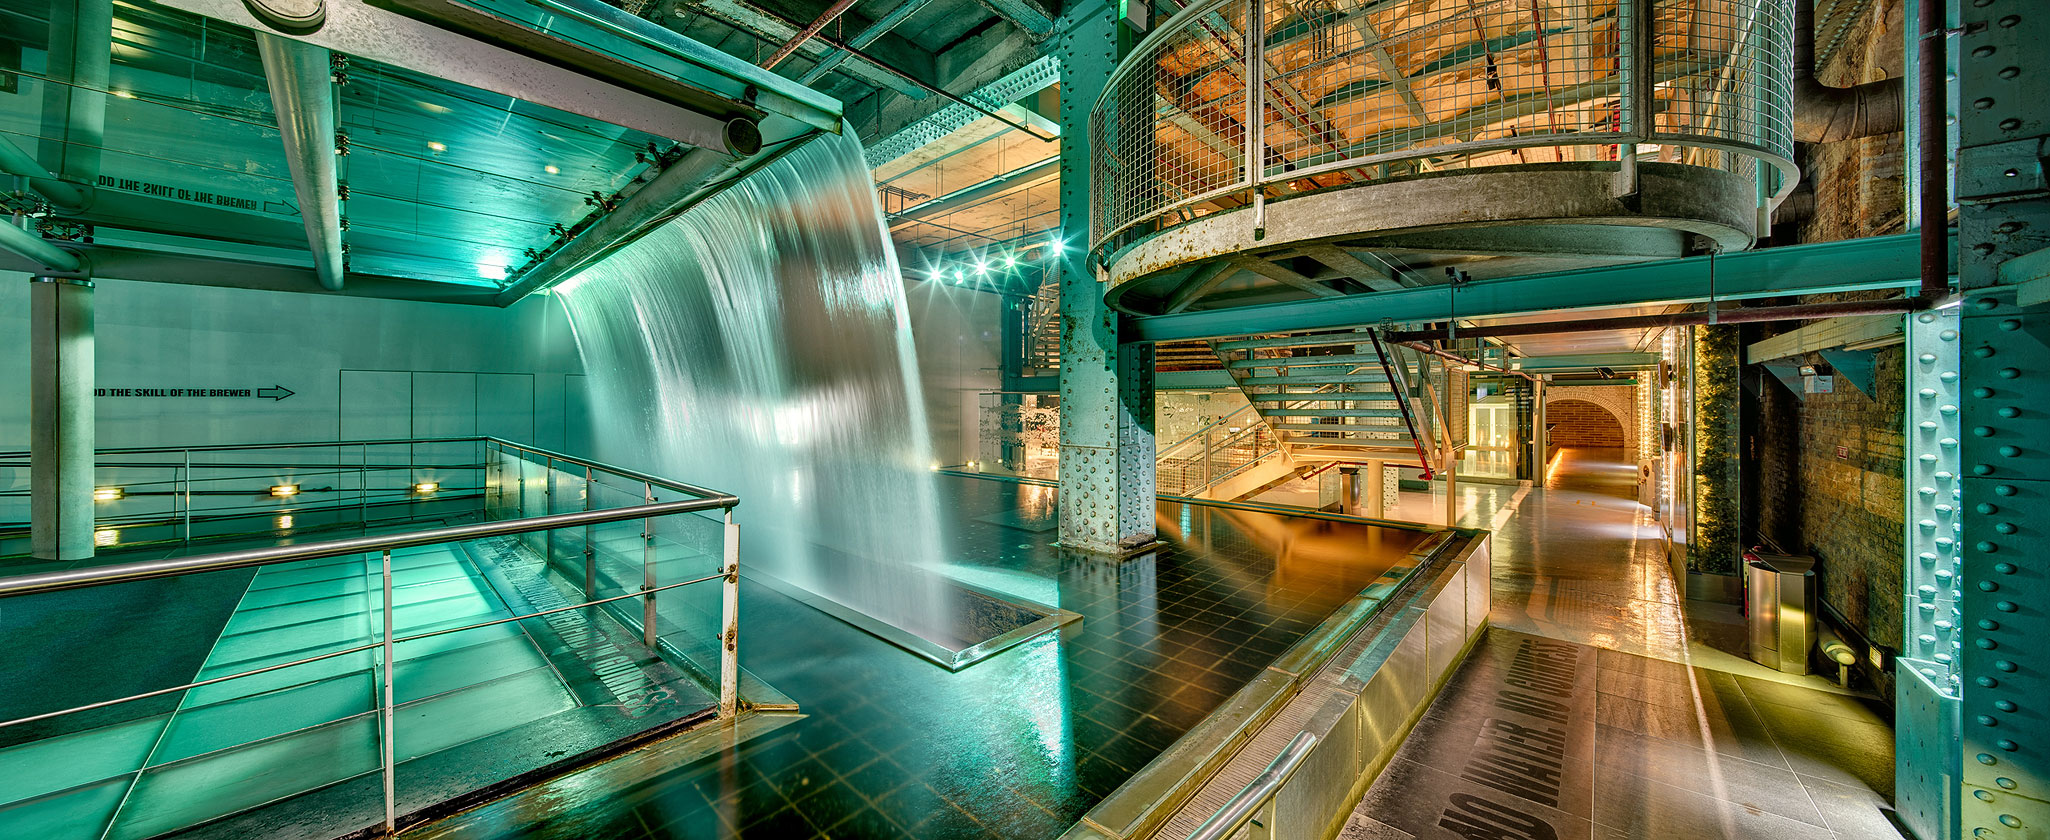 Guinness Storehouse Waterfall industrial photo